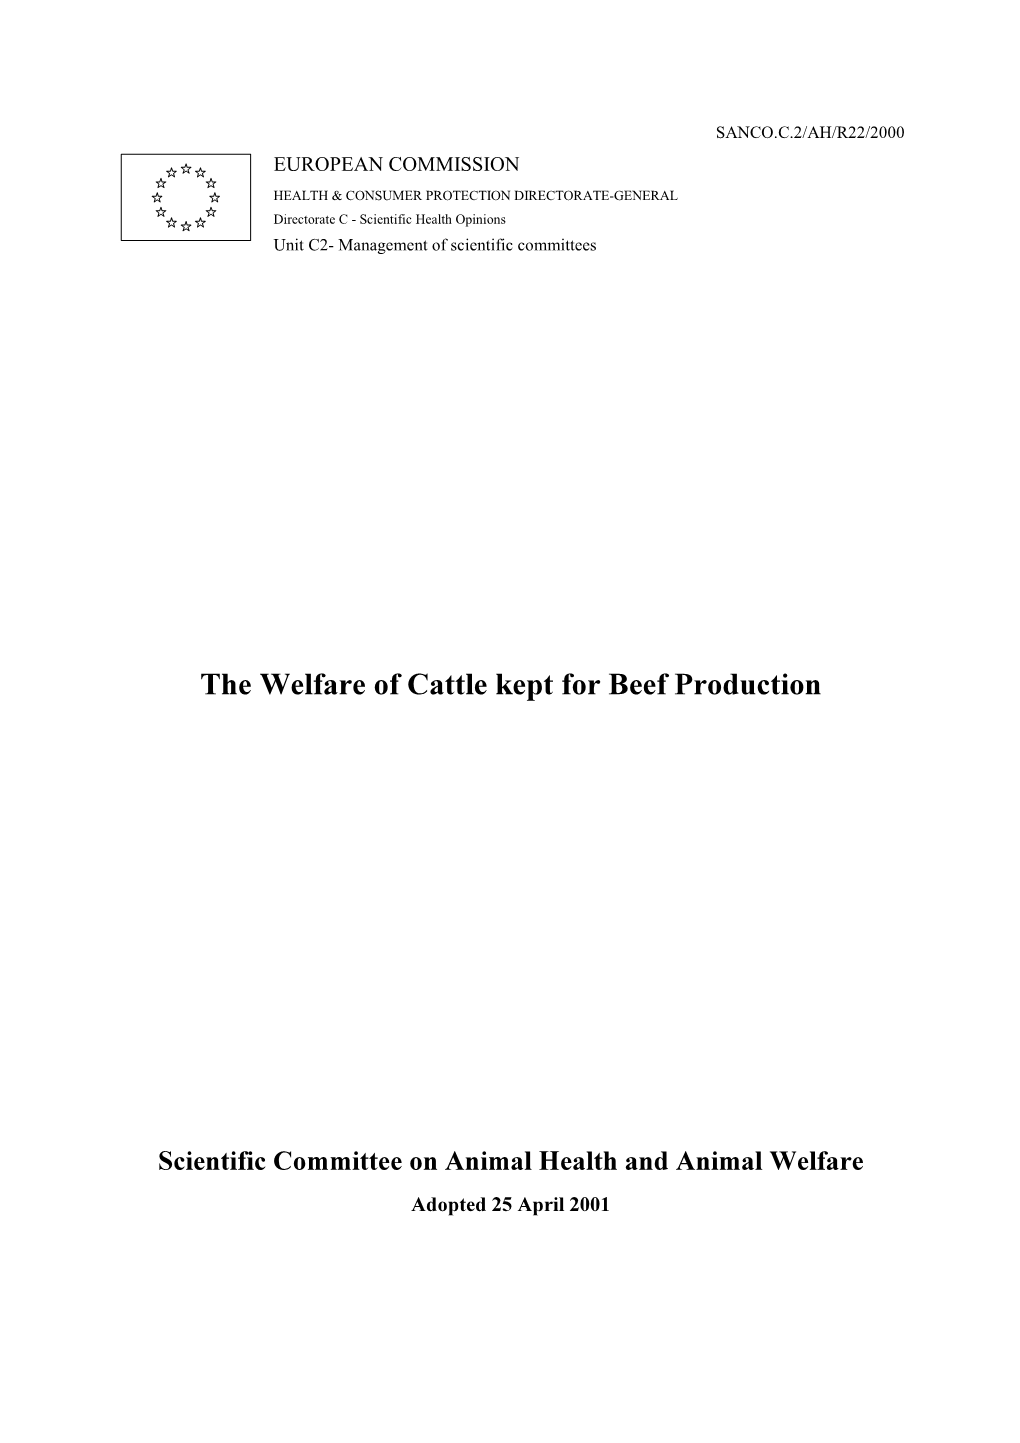 The Welfare of Cattle Kept for Beef Production